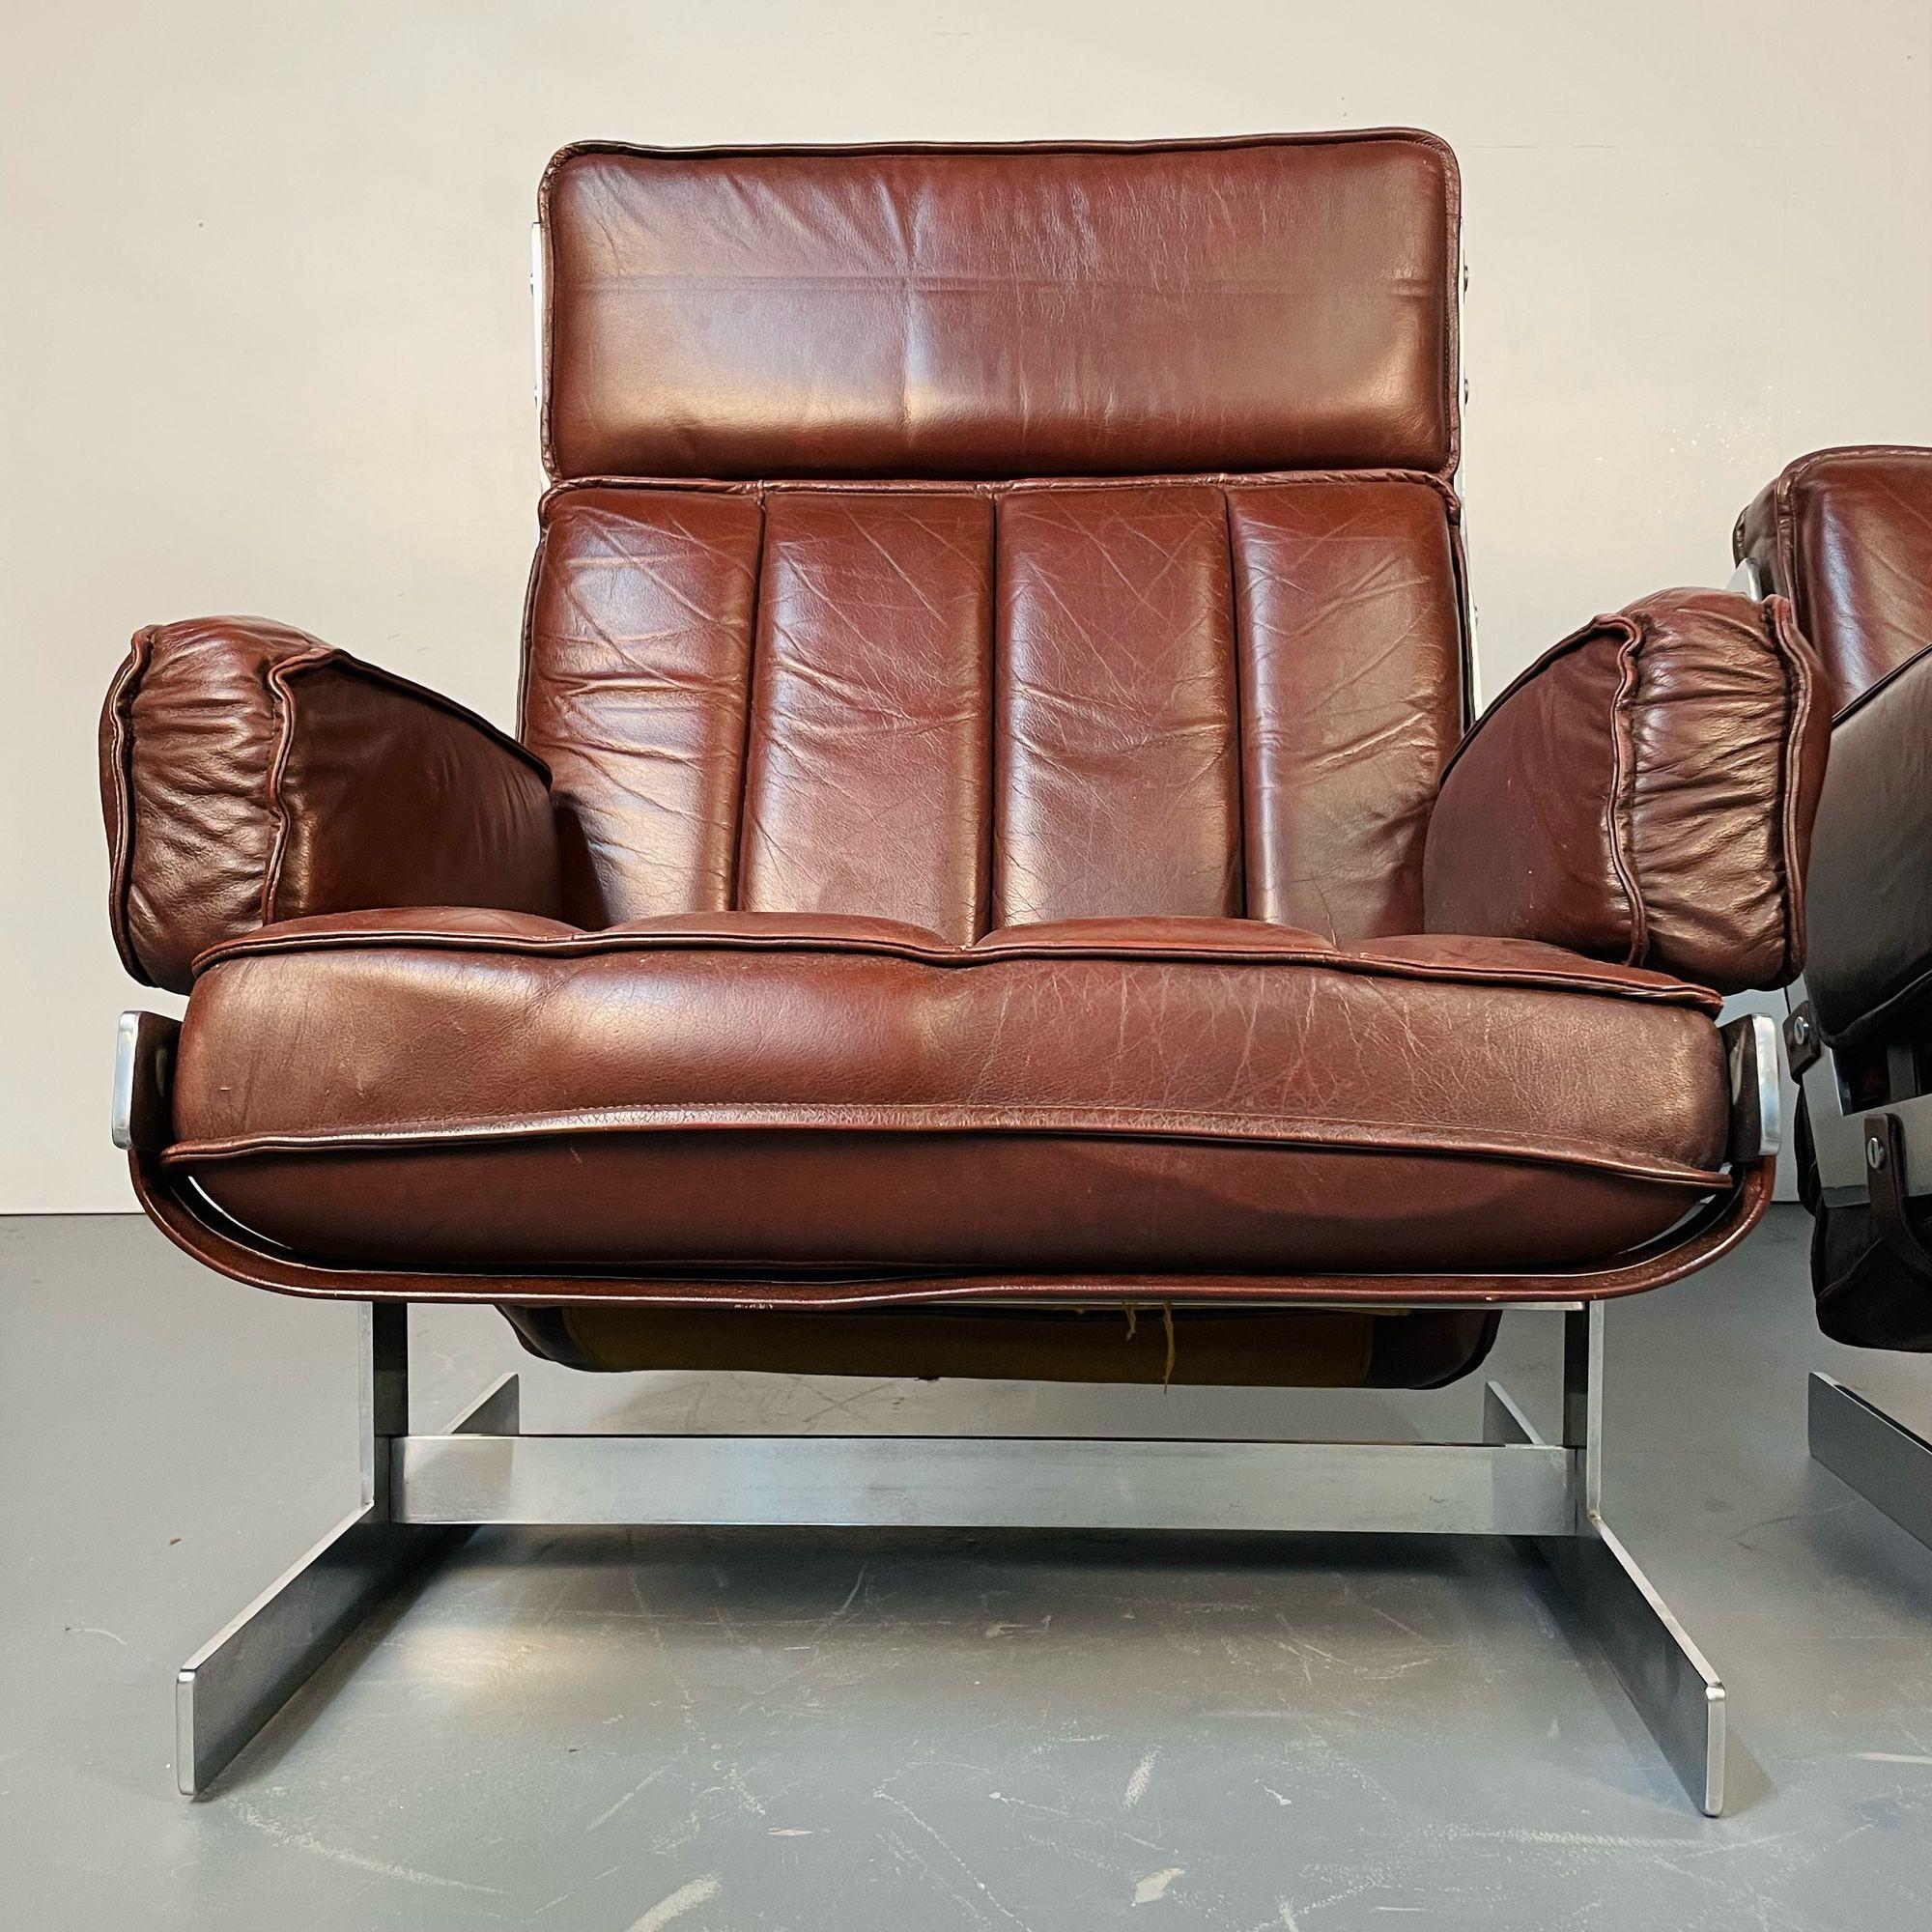 Arne Norell, Swedish Mid-Century Modern Lounge Chairs, Leather, Steel, 1960s For Sale 15